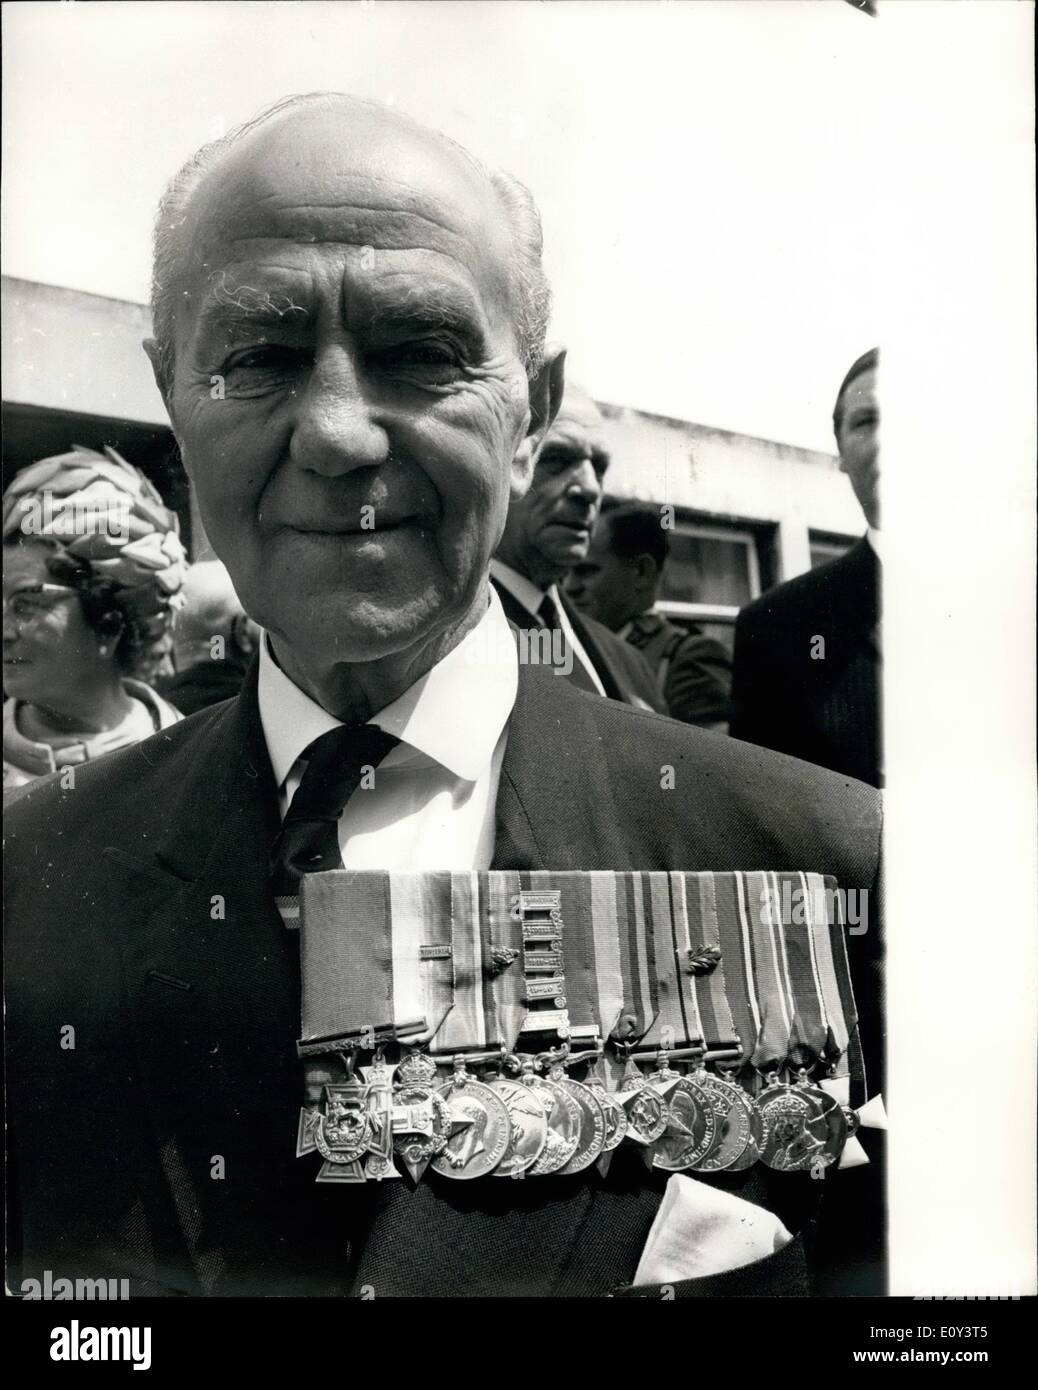 Jul. 07, 1968 - The Victoria Cross and George Cross association's reunion in London - today's luncheon at Chelsea Barracks.: Holders of the Victoria Cross and the George Cross are in London for their reunion organised by the Victoria Cross and George Cross Association. Before going to Buckingham Palace for a reception given by the Queen and the Duke of Edinburgh, the members were entertained at luncheon at Chelsea Barracks today. Photo shows Bemadelled Brigadier Sir John Smyth, of London, makes an impressive picture with his array of medals, which include the V.C. and M.C Stock Photo